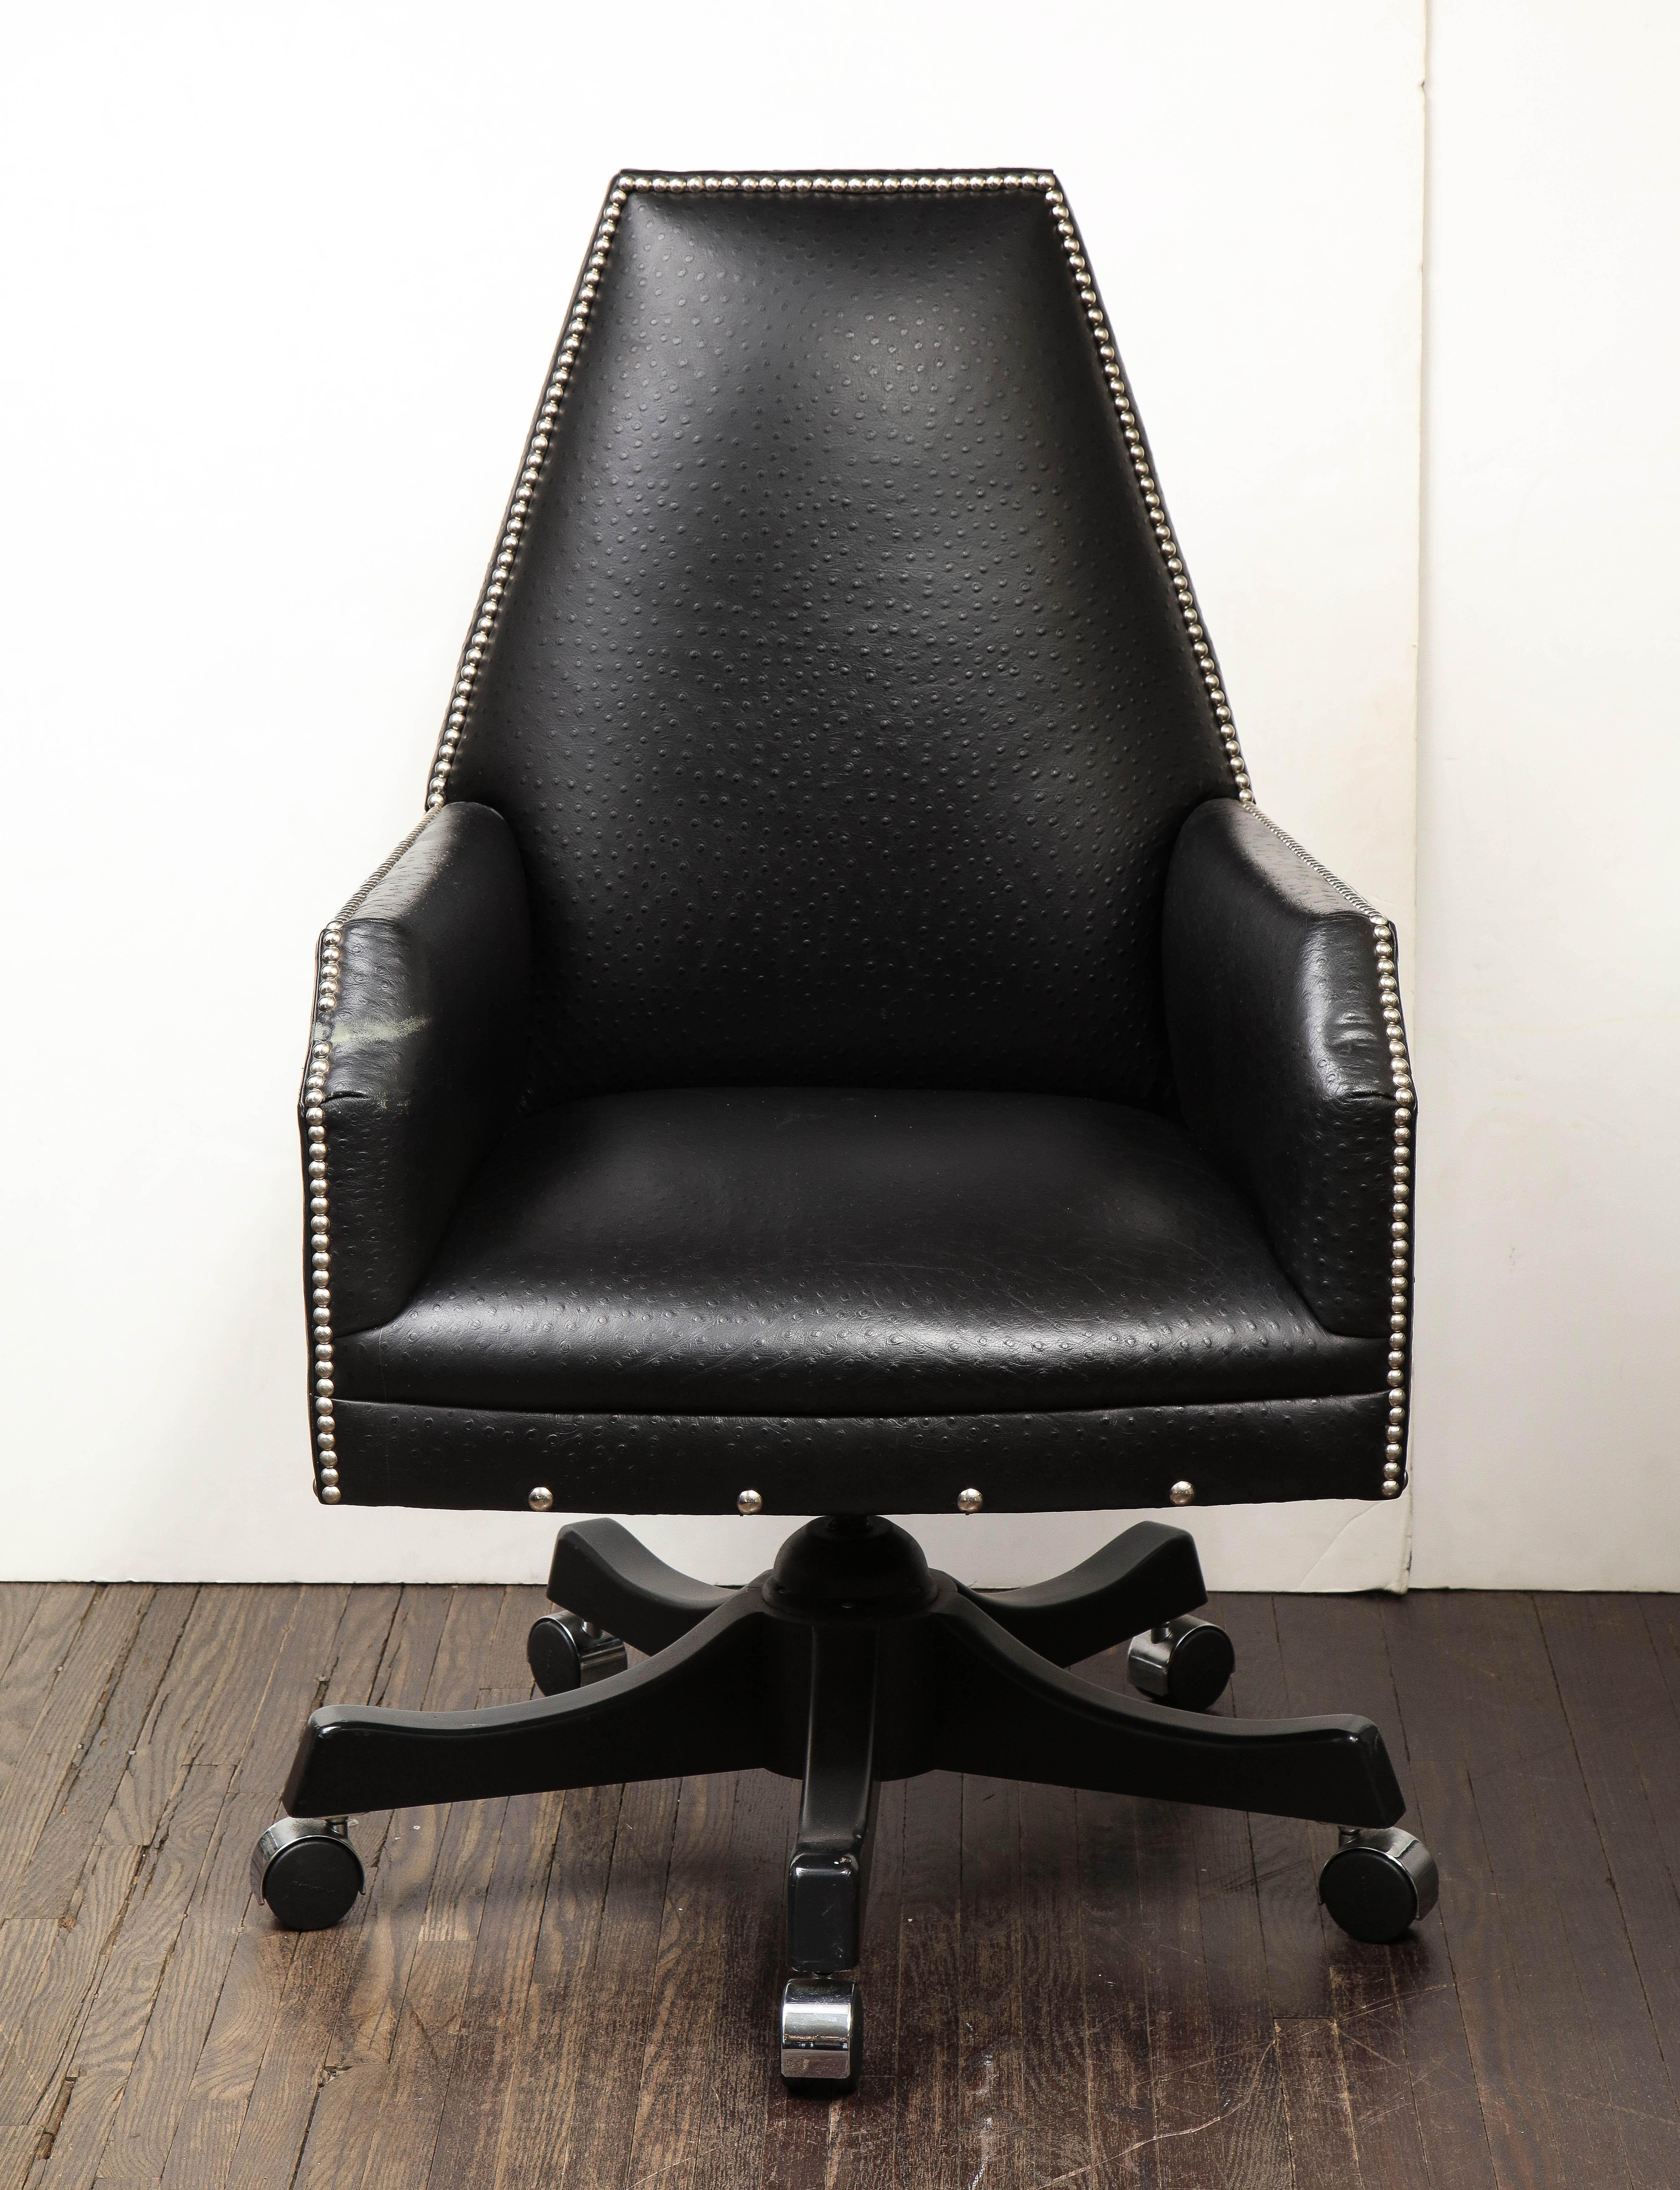 21st century preowned leather desk chair with lacquer swivel roller base and chrome nailheads. The chair is in great shape with some minor wear to the leather on the seat and on the arm. Minor scratching on the lacquered swivel base.